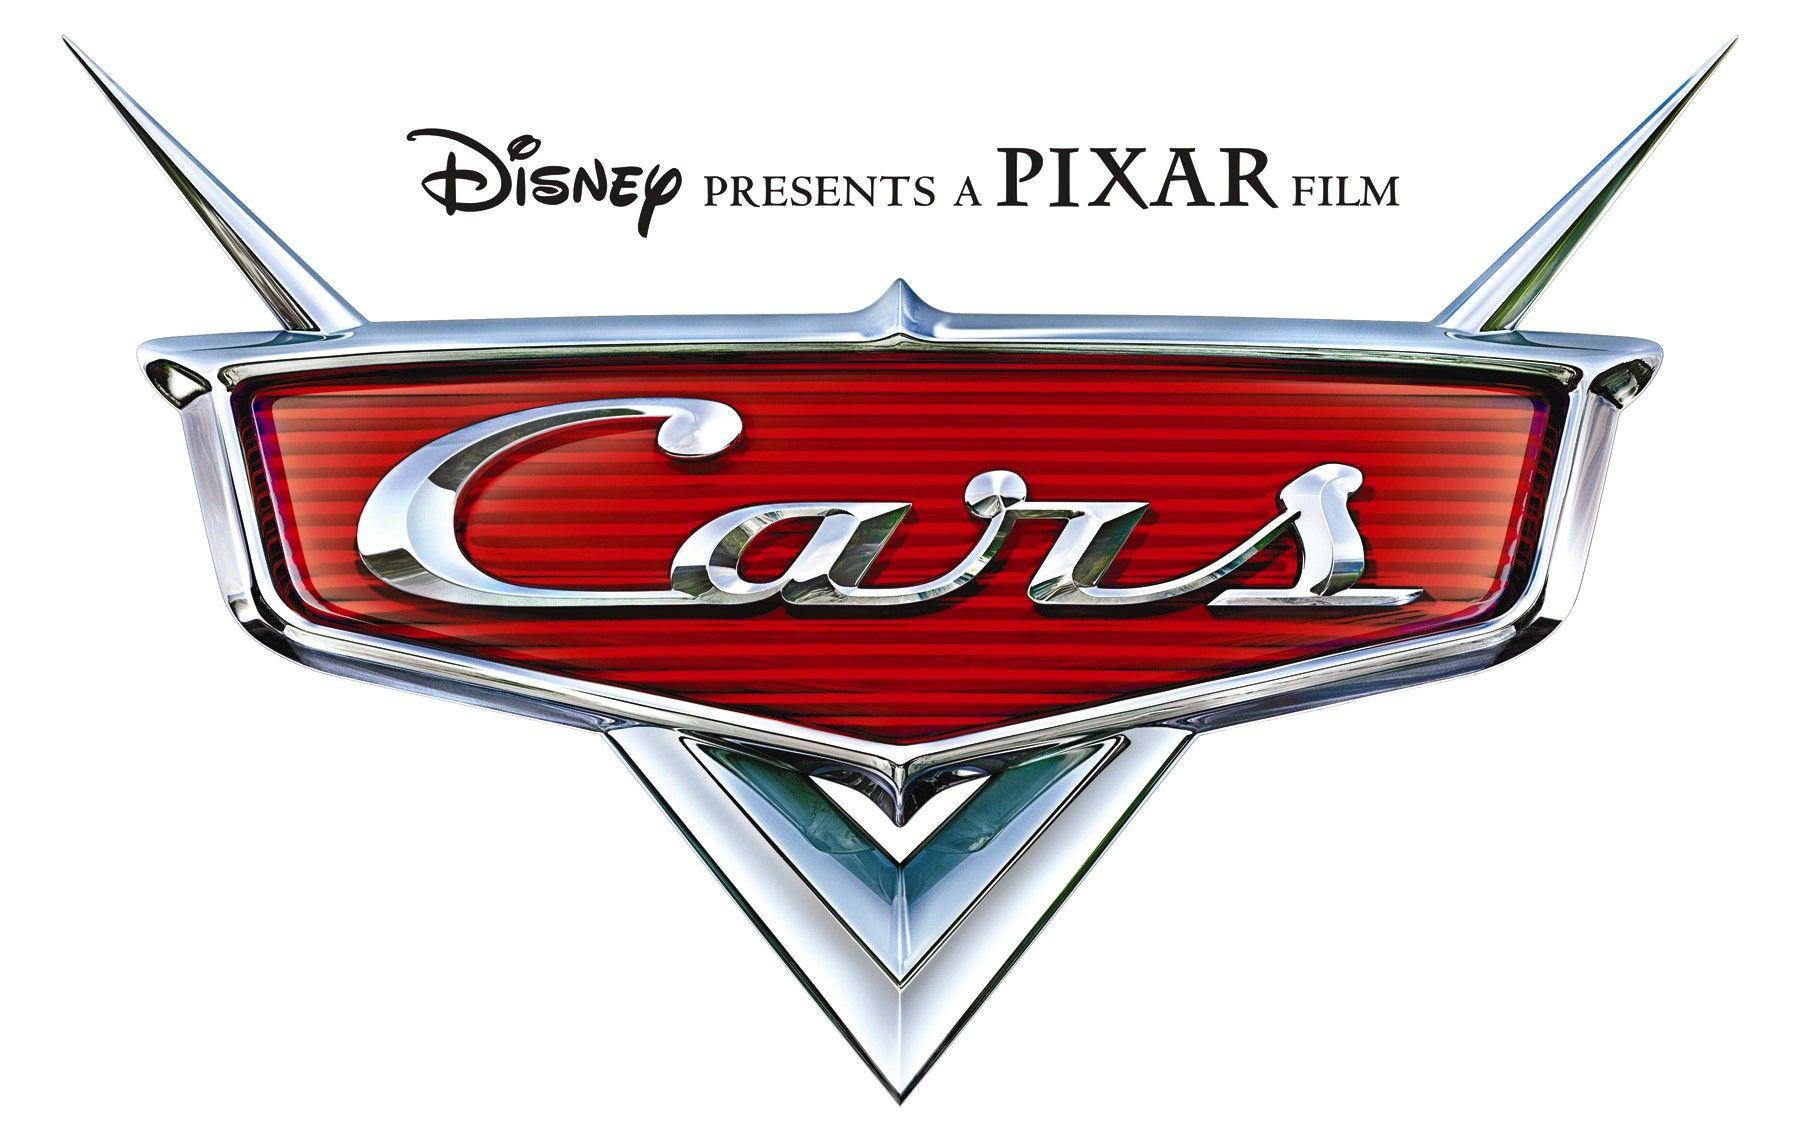 Disney Pixar Cars 2 Logo - Disney Pixar Cars Logo Wallpaper for Phone - Cartoons Wallpapers